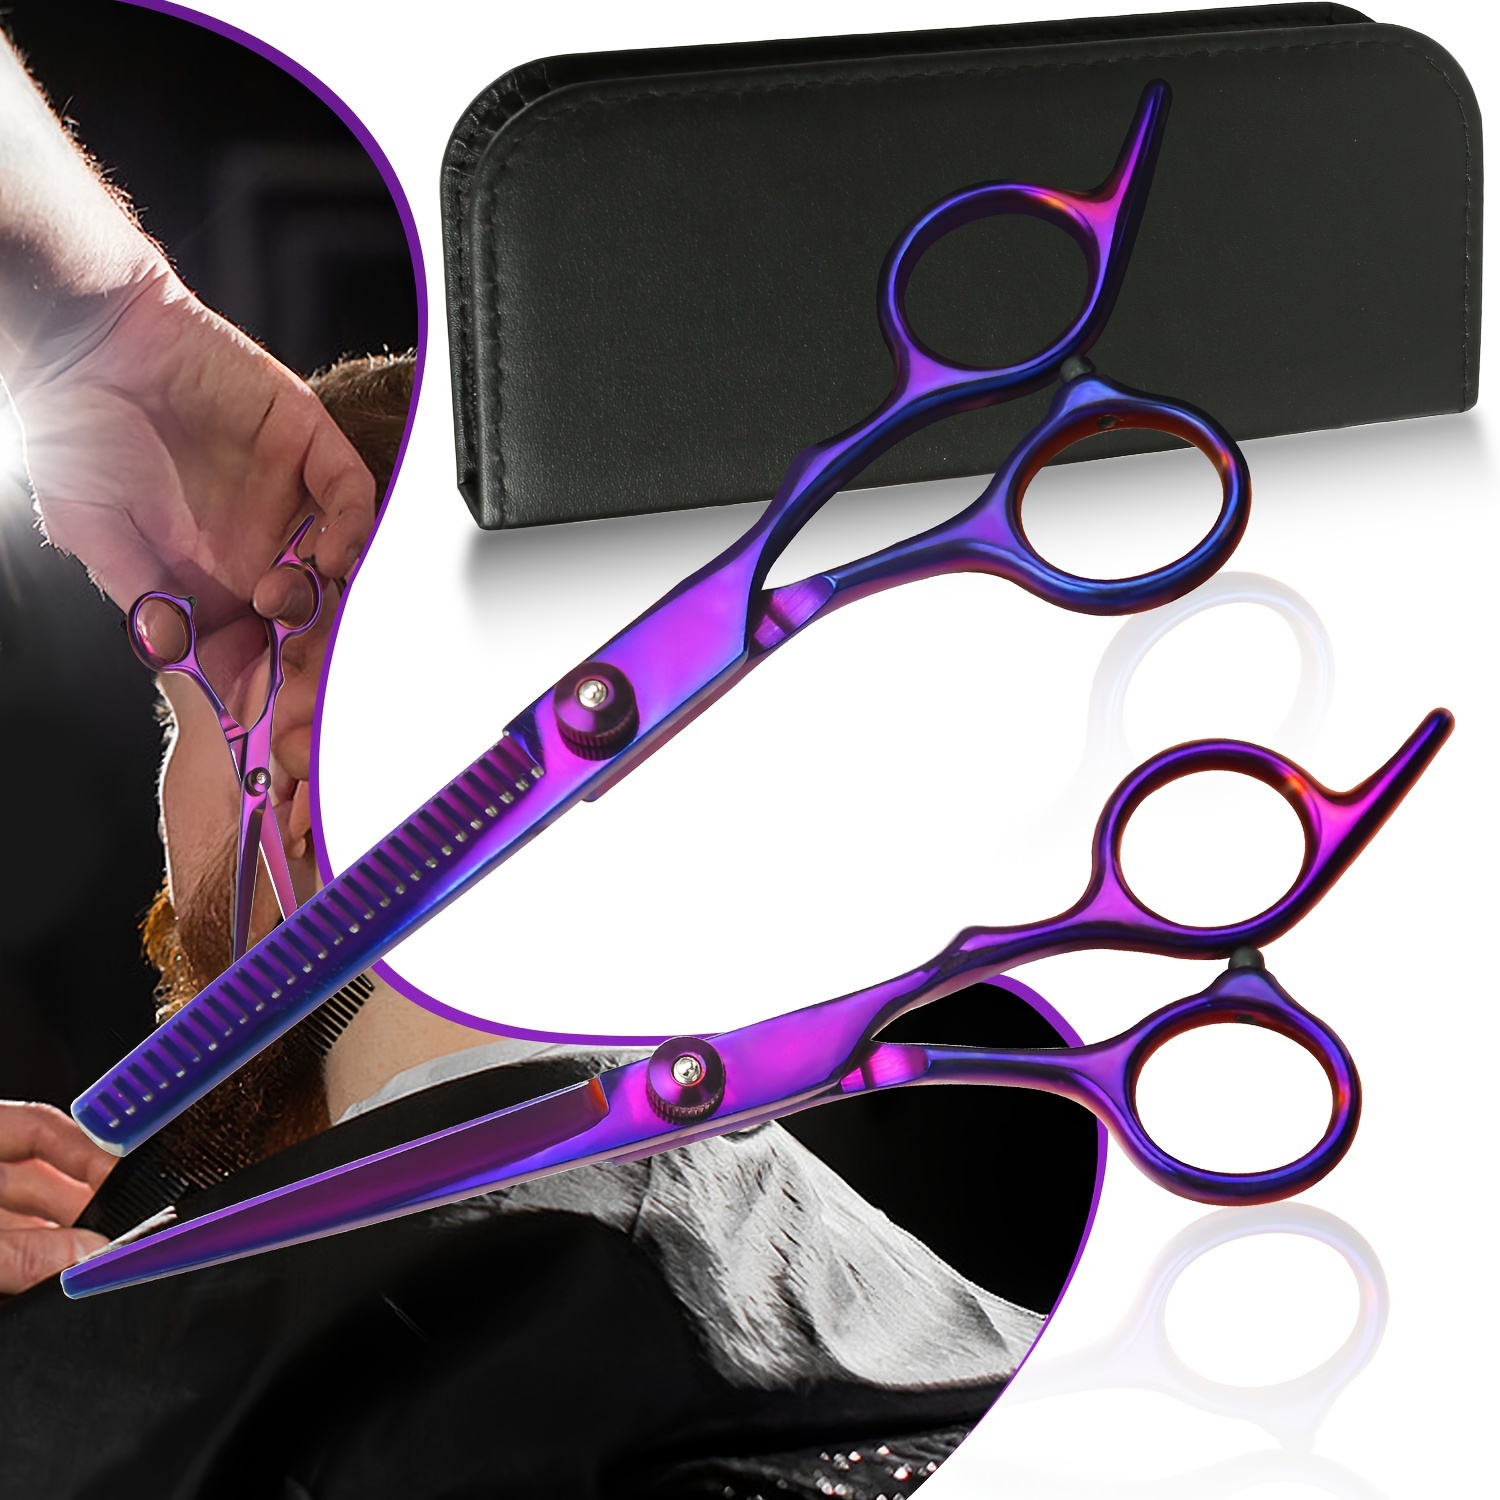 

2pcs/set Purple 6.5 Inch Hairdressing Scissors Set Professional Hair Cutting Thinning Scissors Shears Hair Styling Beauty Tools For Men And Women